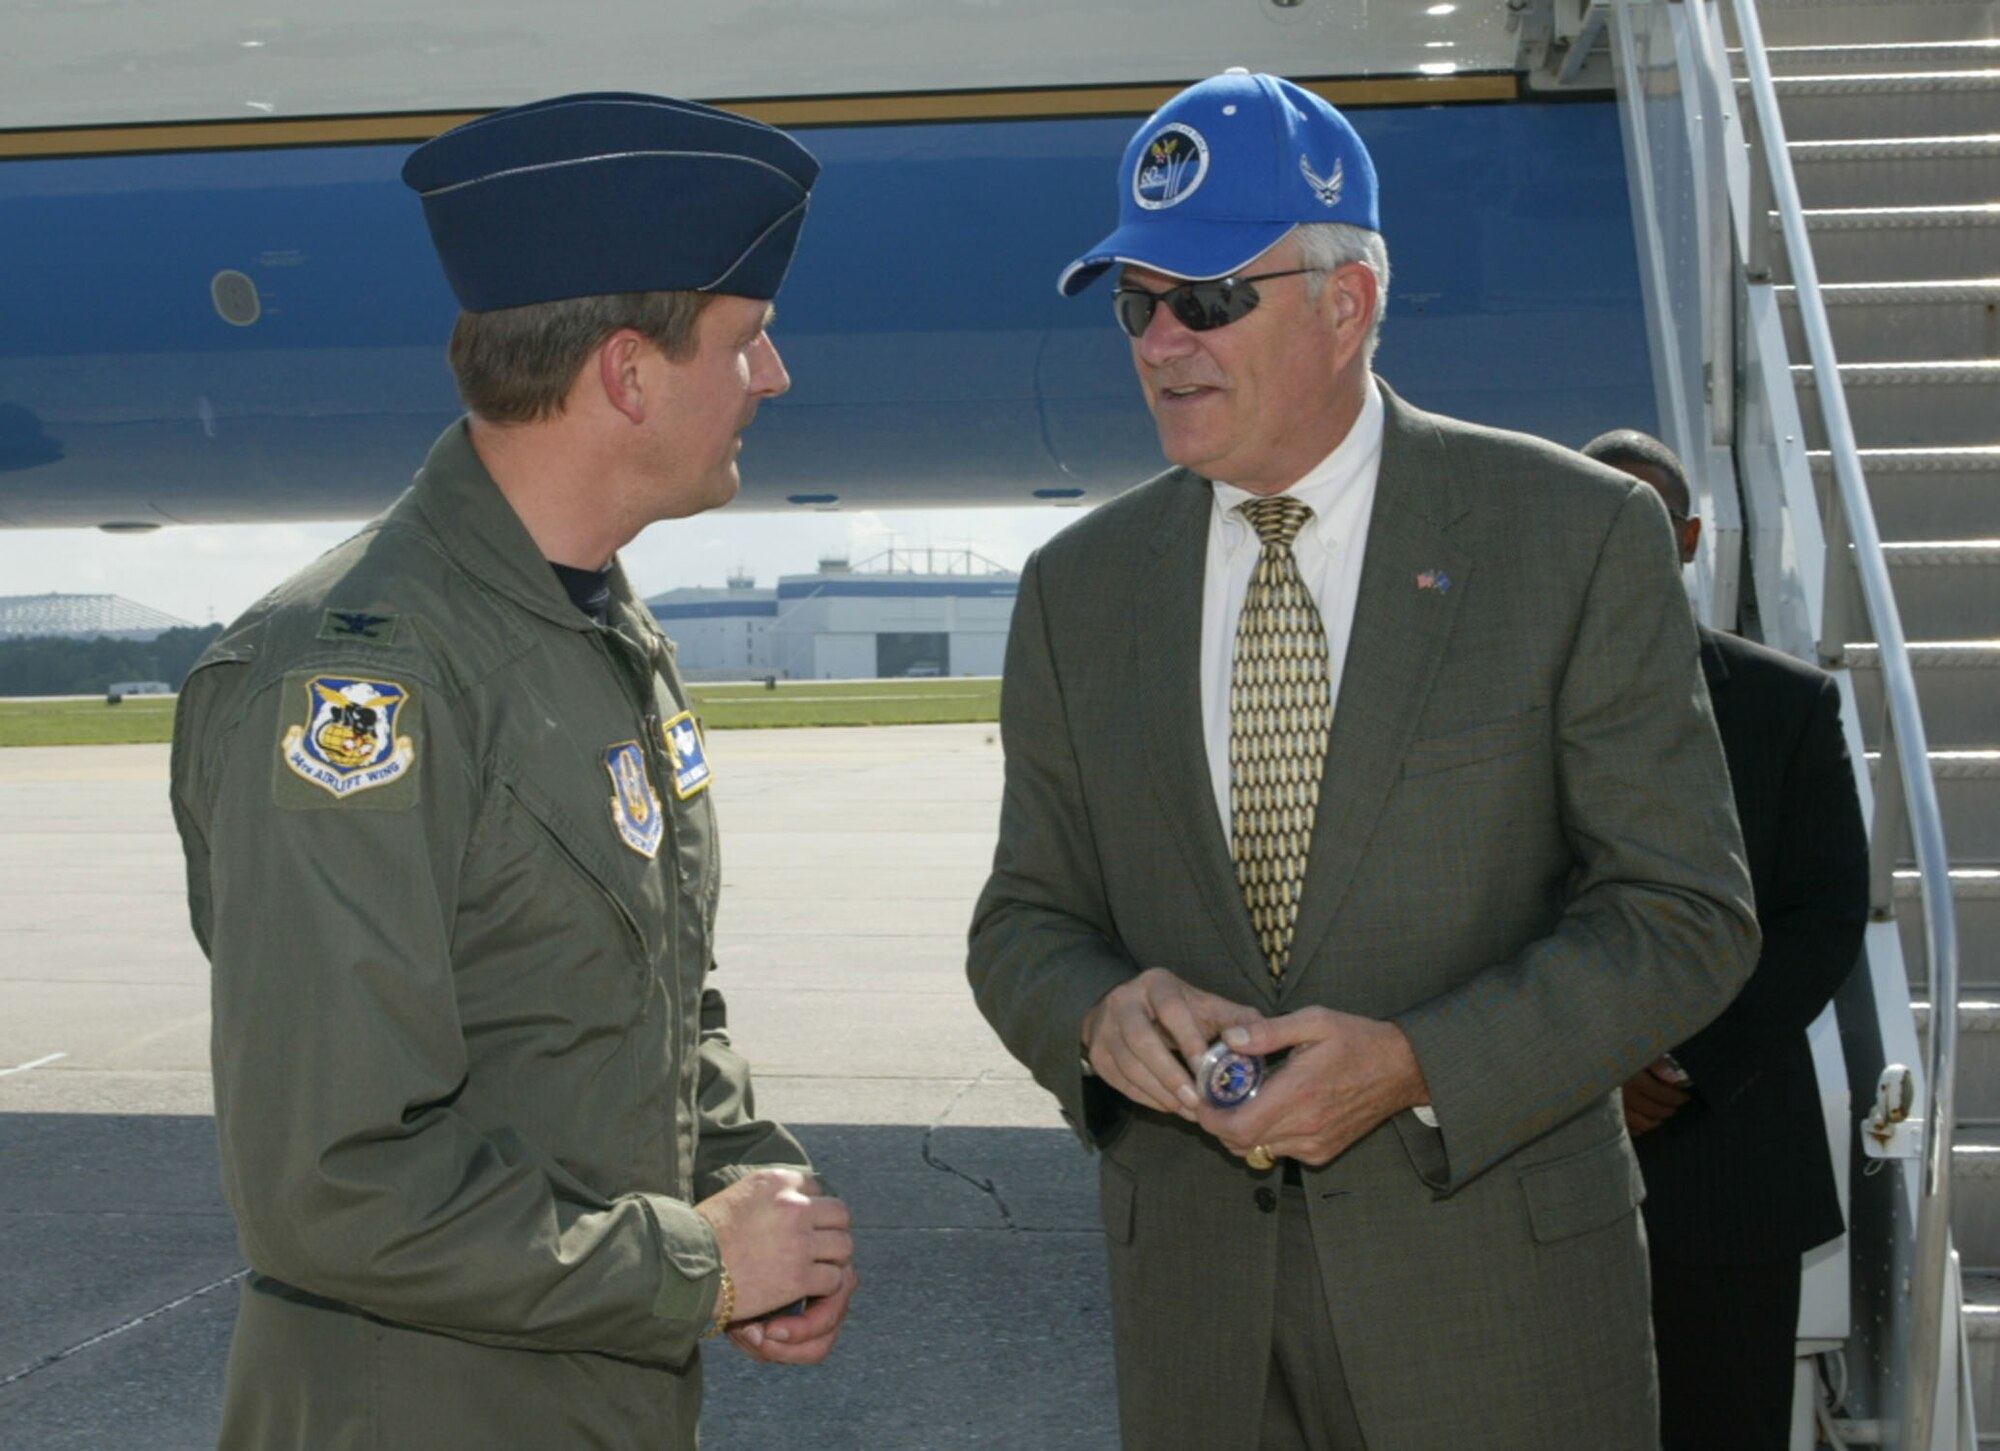 Col. Heath Nuckolls, 94th Airlift Wing commander, presented Secretary of the Air Force, Michael W. Wynne with an Air Force Week Atlanta coin on Mr. Wynne's arrival to Dobbins Air Reserve Base Aug 28. Mr. Wynne came to Marietta for the rollout of the 100th F-22 at the Lockheed Martin Aeronautics plant here.  